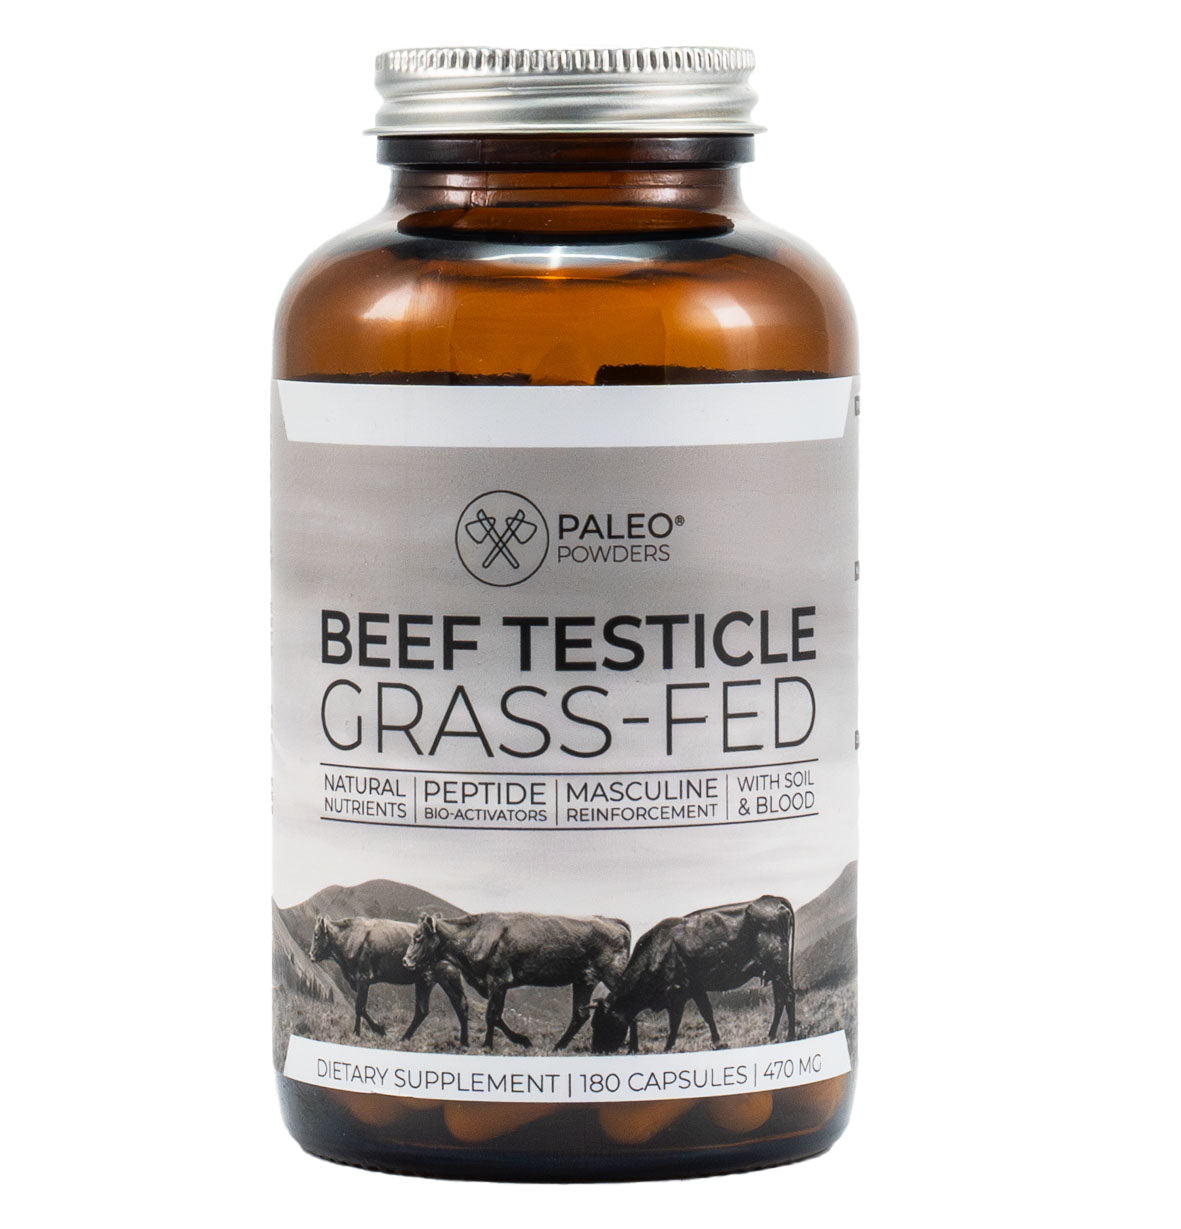 Beef Testicles - Grass-fed - 180 capsules - Paleo Powders